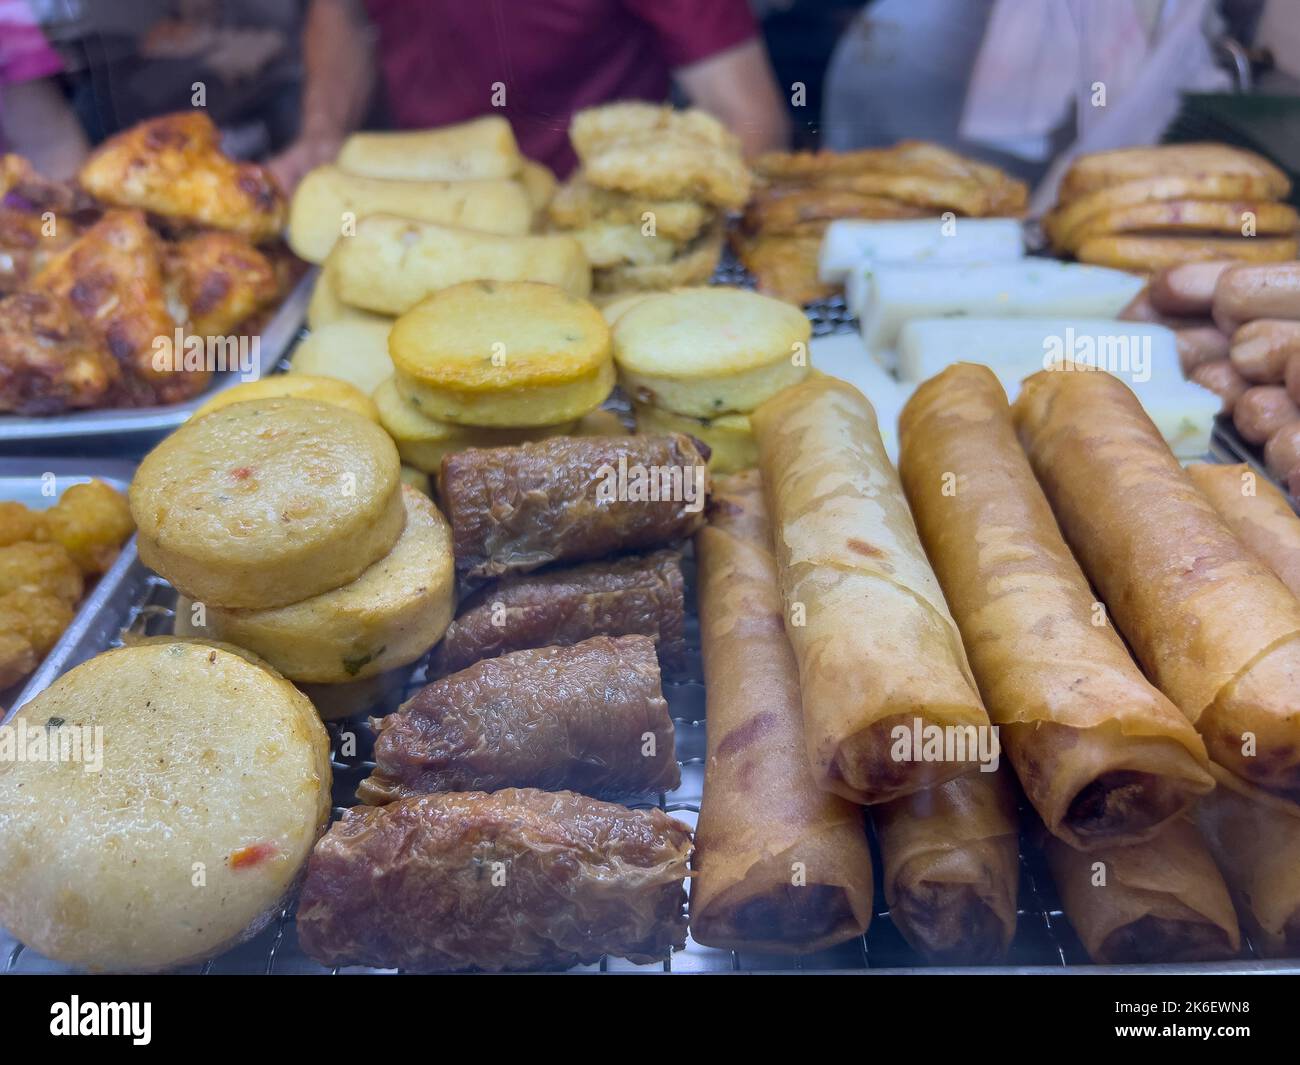 Display of economy bee Hoon side dishes to start your day with a hearty meal at a hawker centre, Singapore Stock Photo